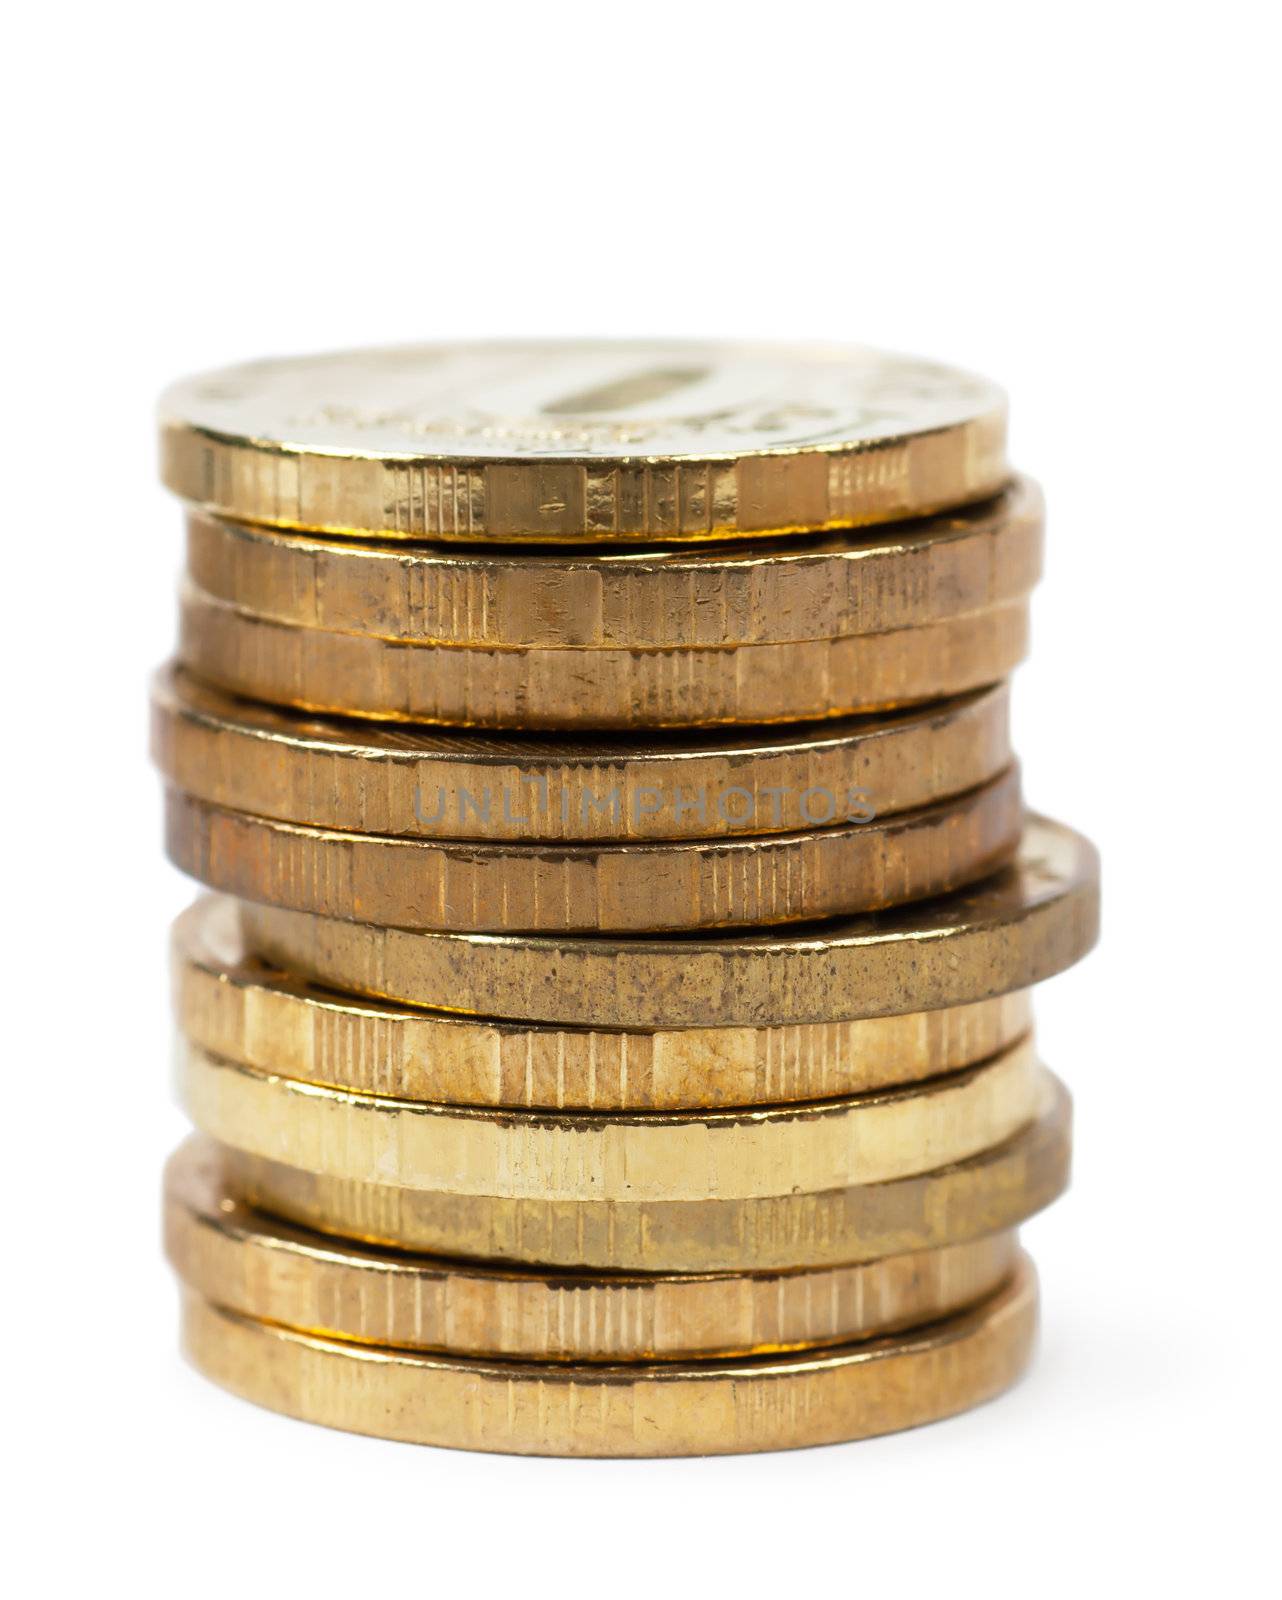 A stack of coins isolated on the white